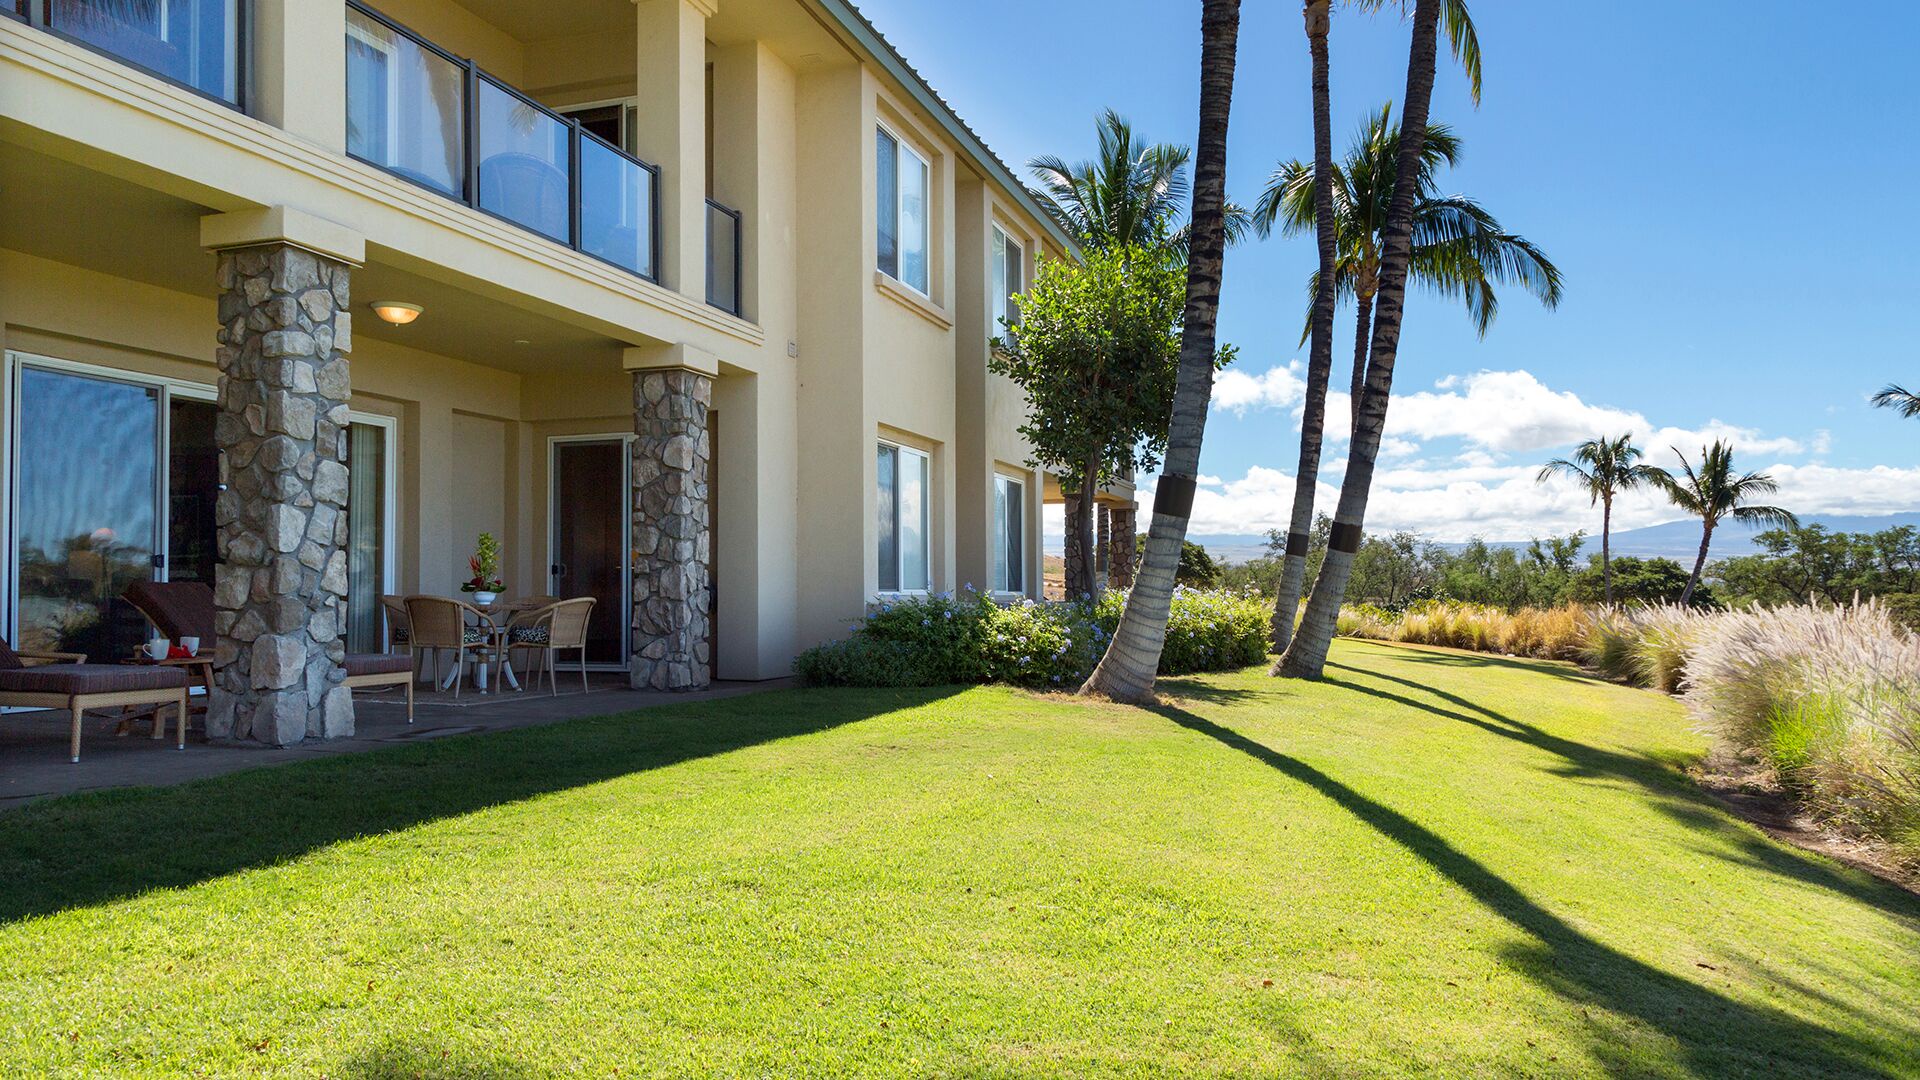 Kamuela Vacation Rentals, Kumulani I-1 - A large grassy area in front of your private lanai for your kids to enjoy playing or an area to sunbathe in the day or stargaze at night!